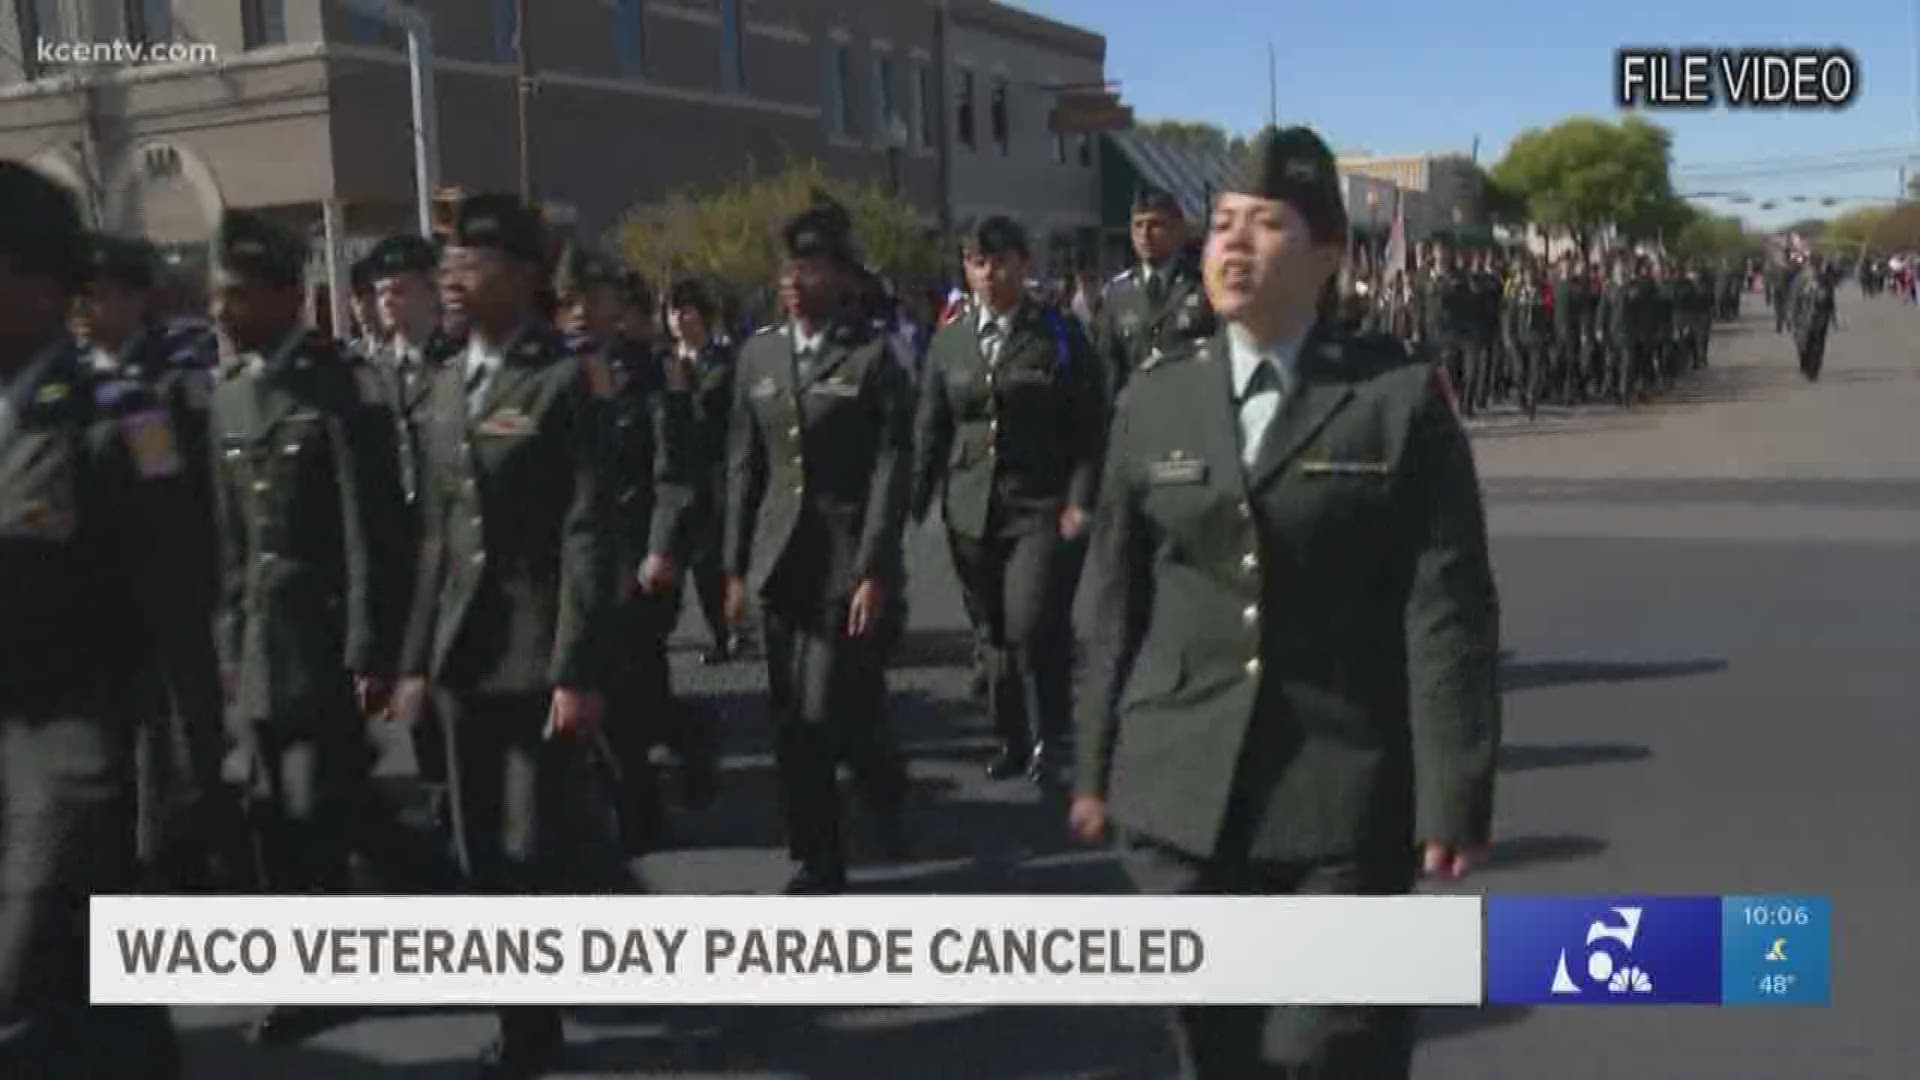 The McLennan County Veterans' Association decided to cancel the parade because of weather concerns.